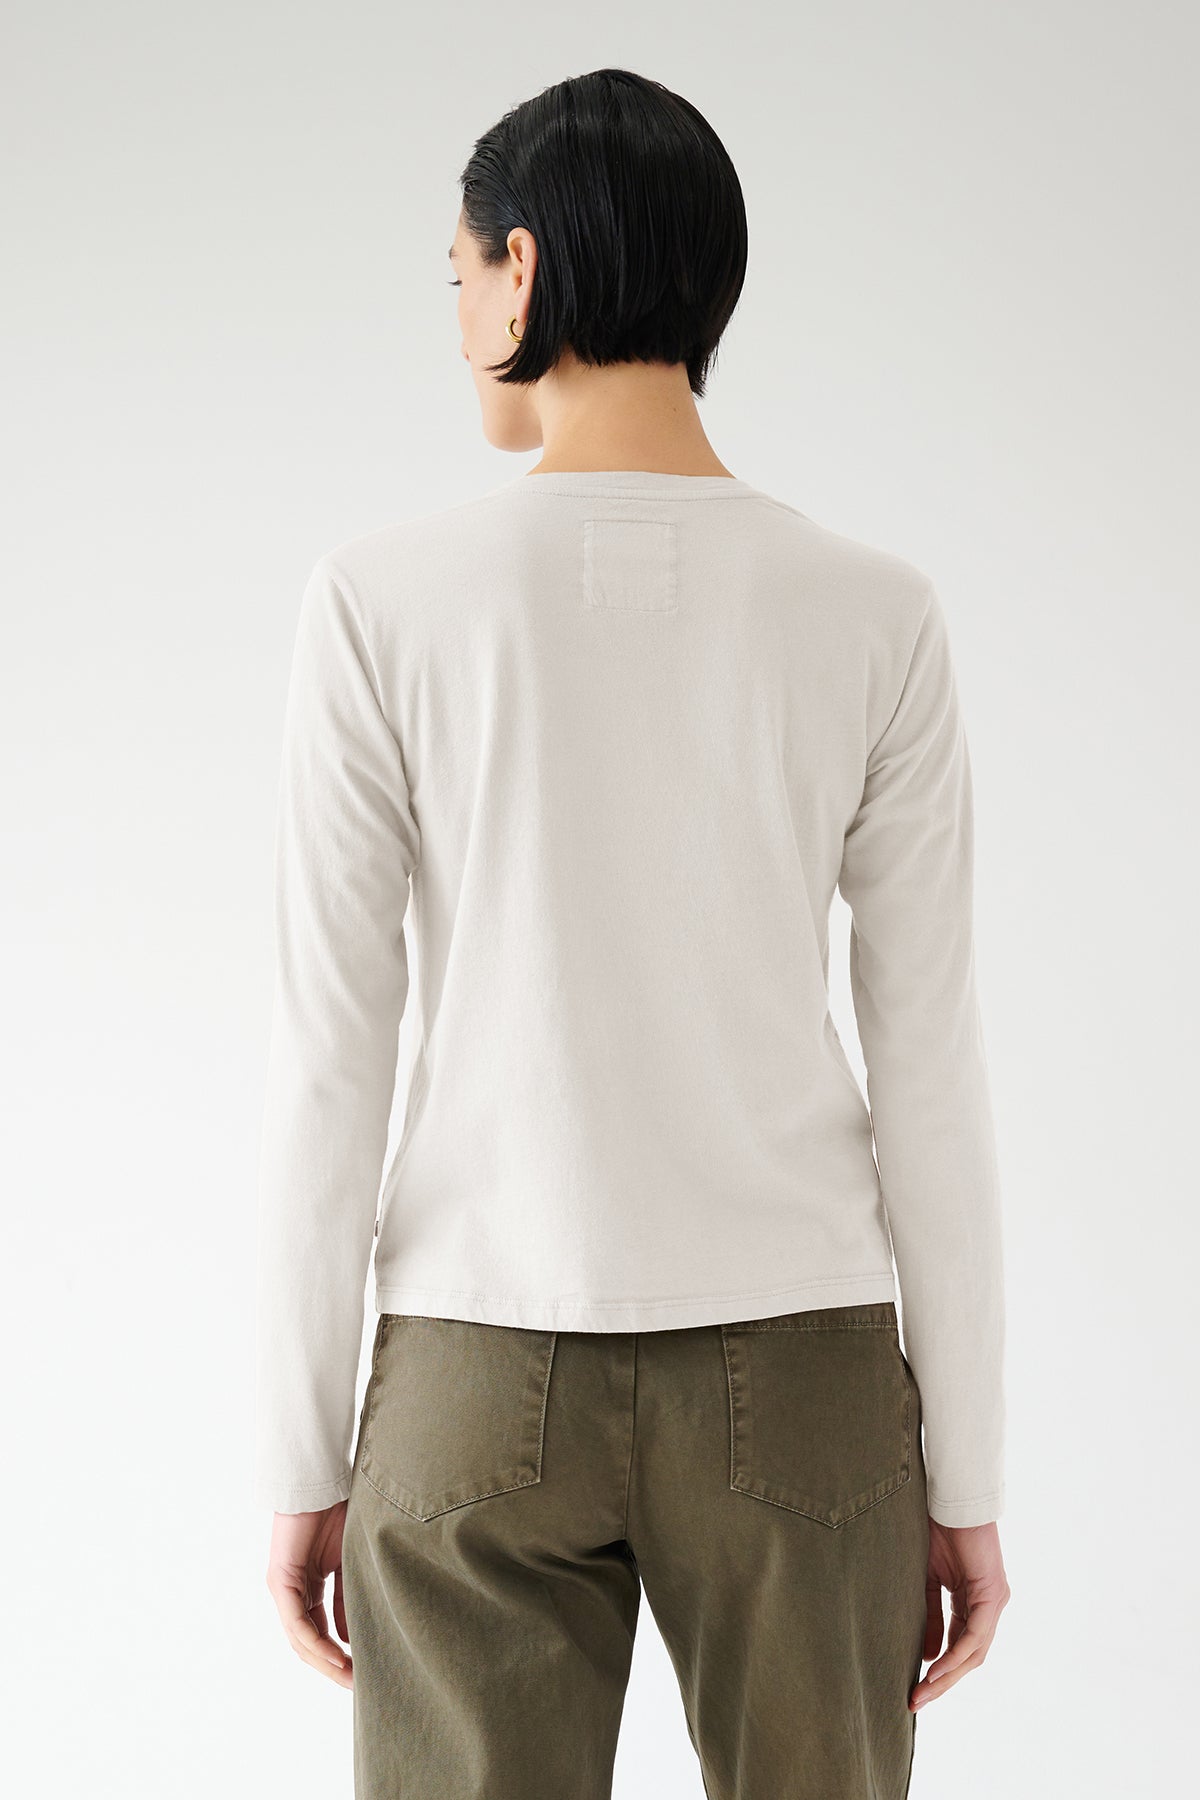 A person wearing a VICENTE TEE made from organic cotton and green pants, viewed from behind, embodying seasonless dressing by Velvet by Jenny Graham.-36503793598657